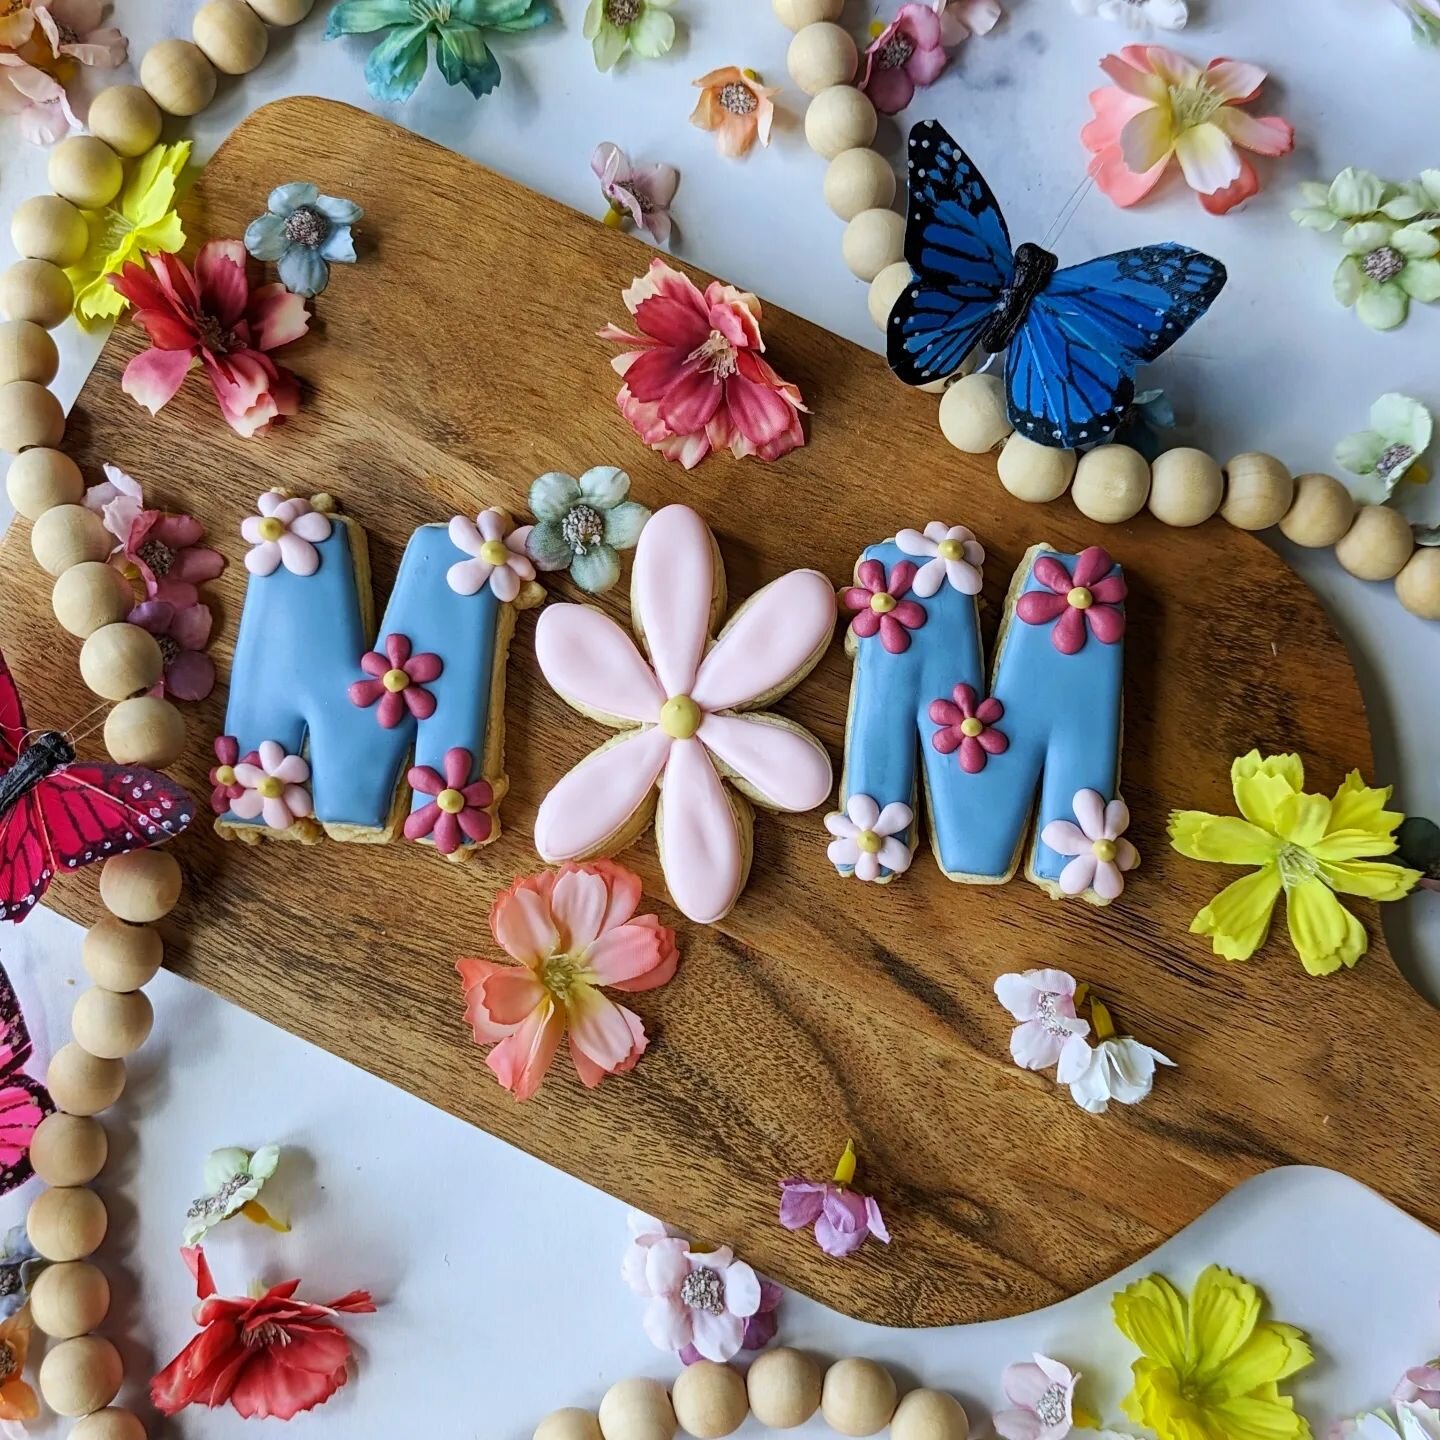 Sweetest way to show momma we care- handmade sugar cookies with love to spare! 🌸
.
Link in bio*
.
#MothersDay #Mommy #MommysDay #Mom #Cookies #Gift #CookieTreats #SweetTreats #SugarArt #CookieArt #Flowers #Gifts #Surprise #Treats #Nyc